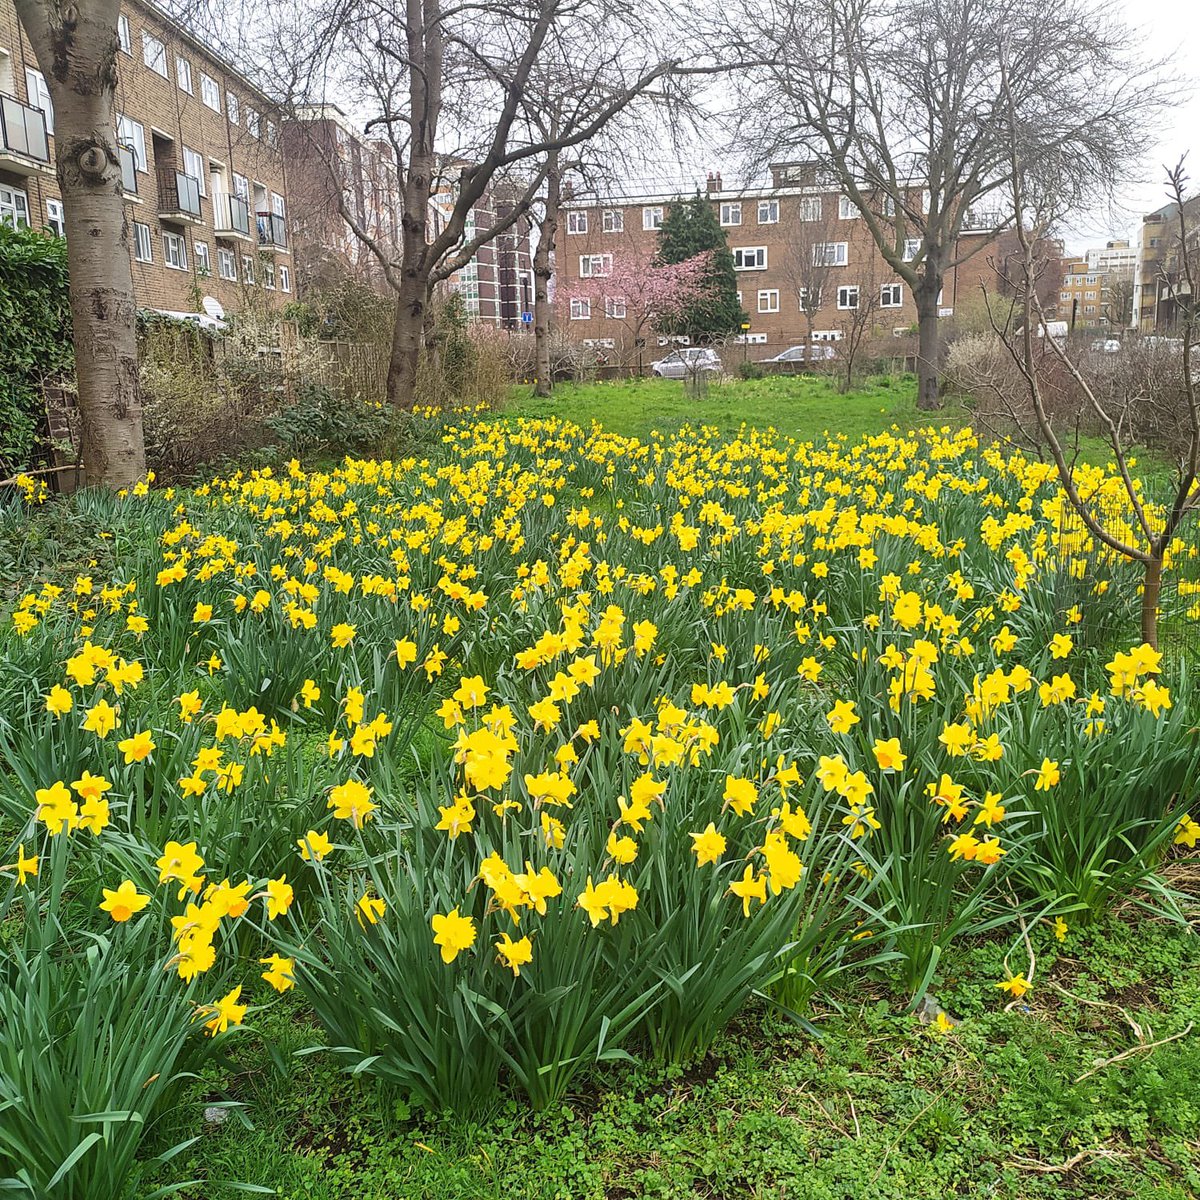 Daffodils are in their prime at the orchard, and their scent is filling the air. Worth a visit if you’re passing! #daffodils #communityorchard #hackney